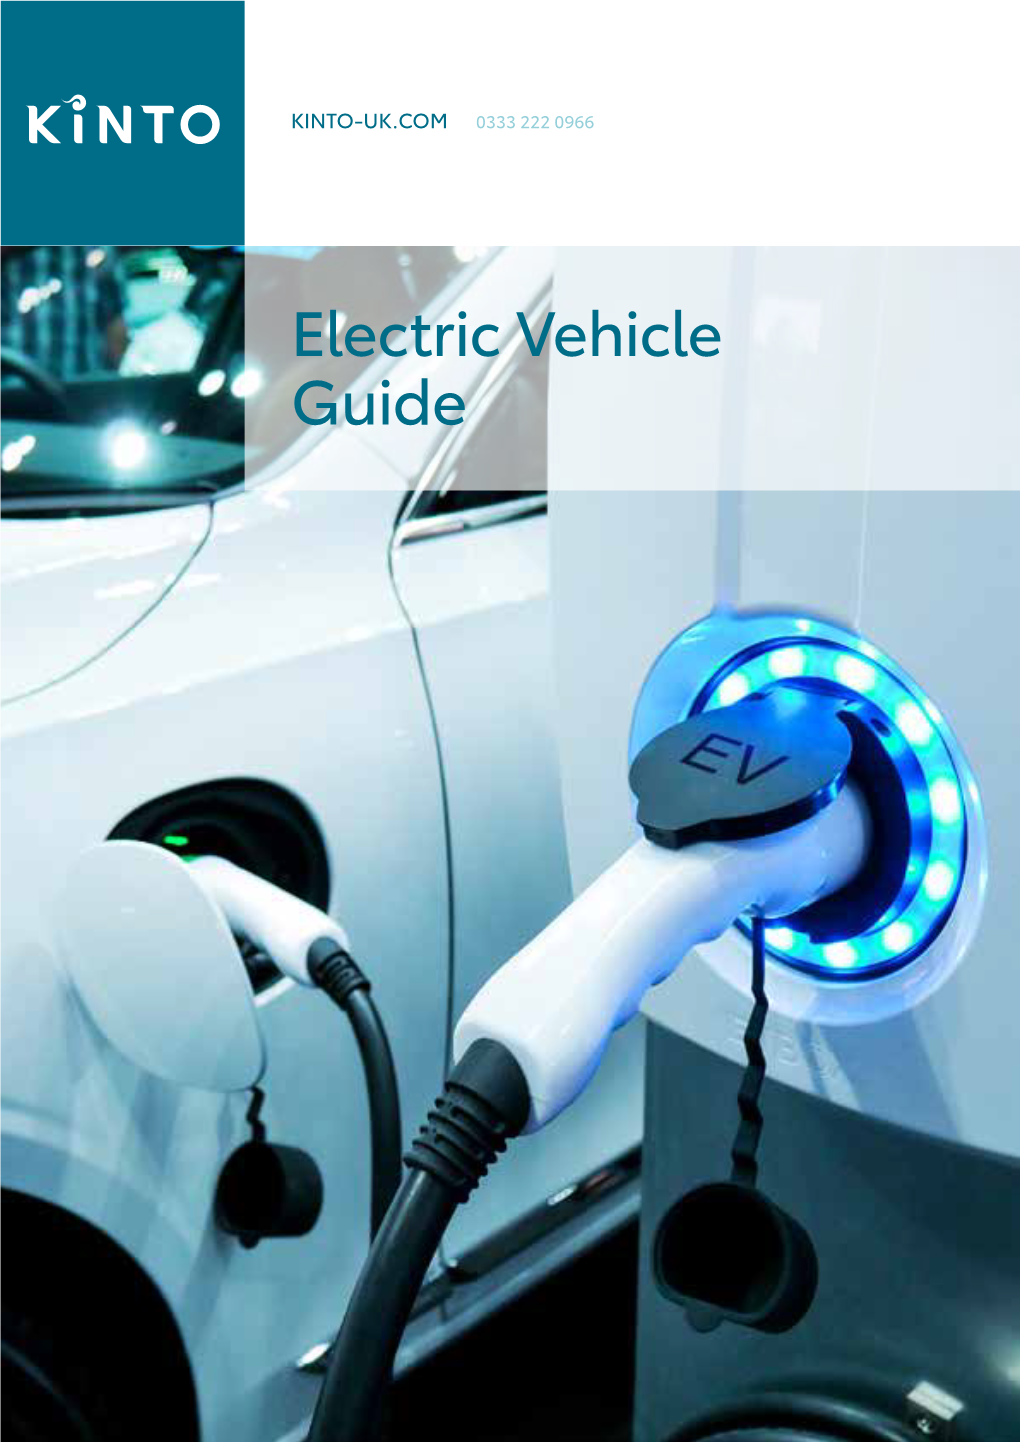 Electric Vehicle Guide Contents